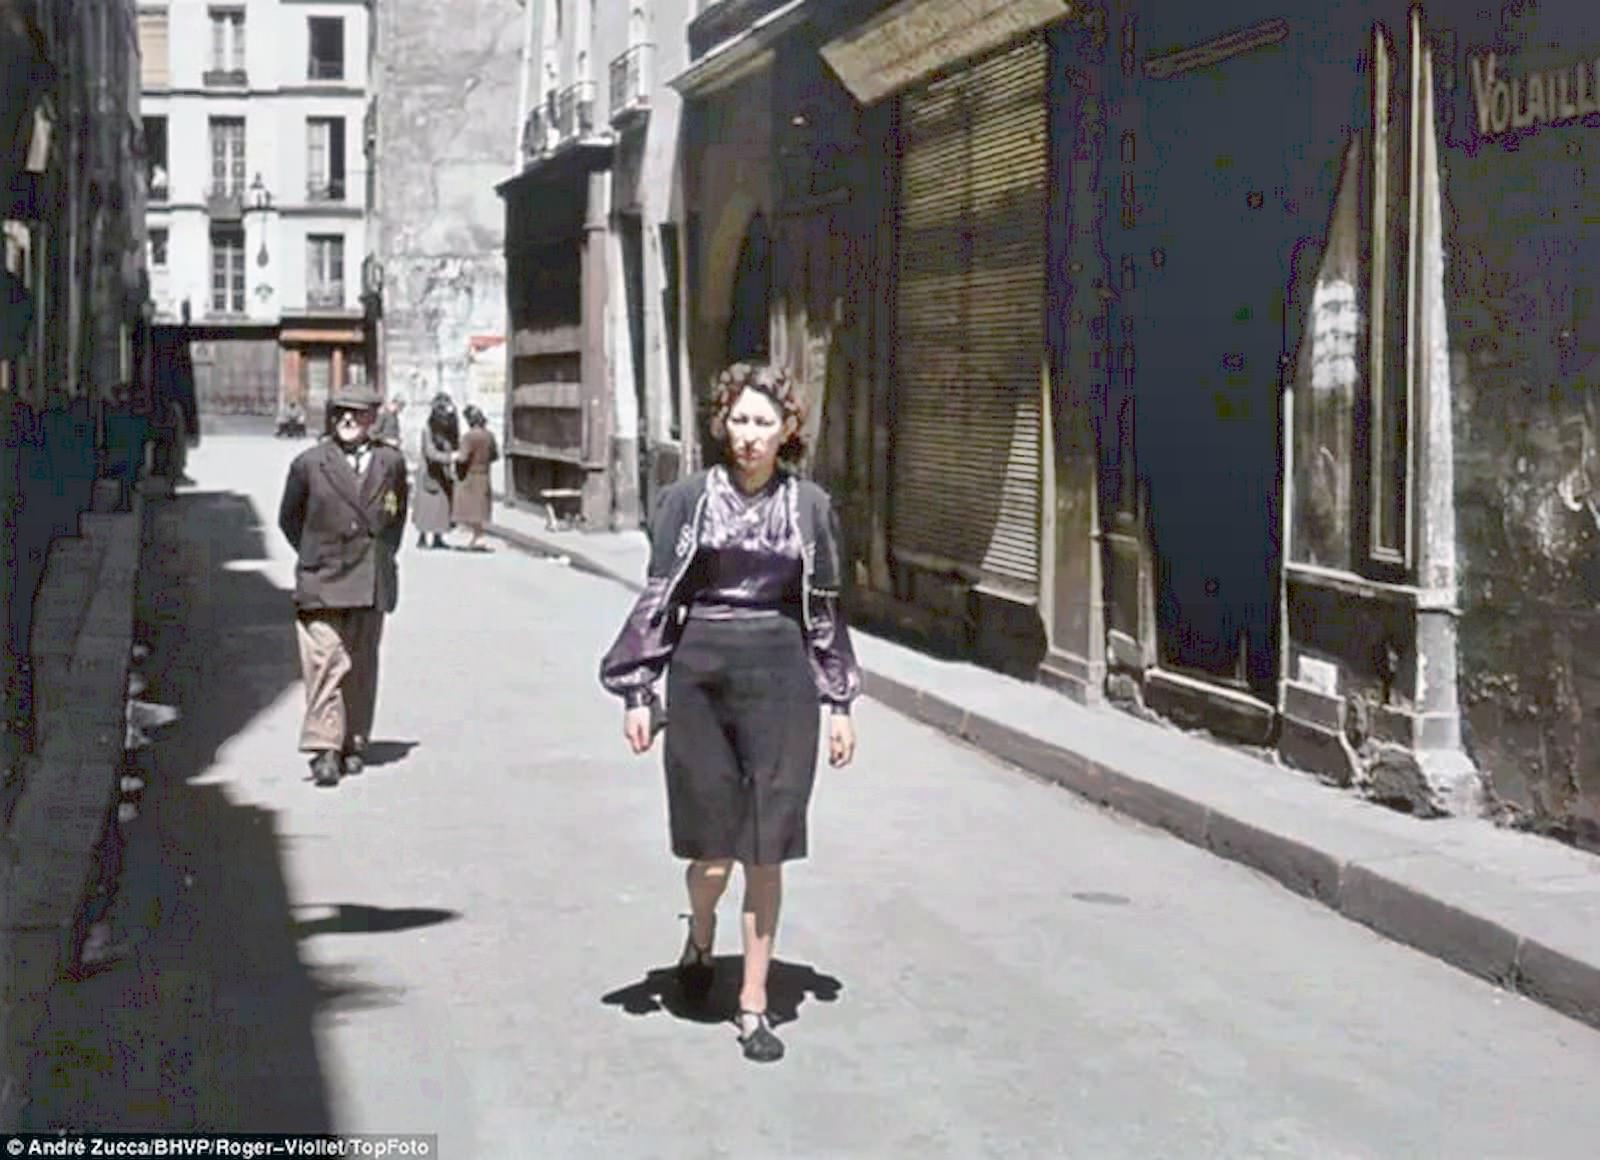 A woman walks a Parisian backstreet, in front of an older gentleman who is marked with the Star of David insignia that Jews were forced to wear.